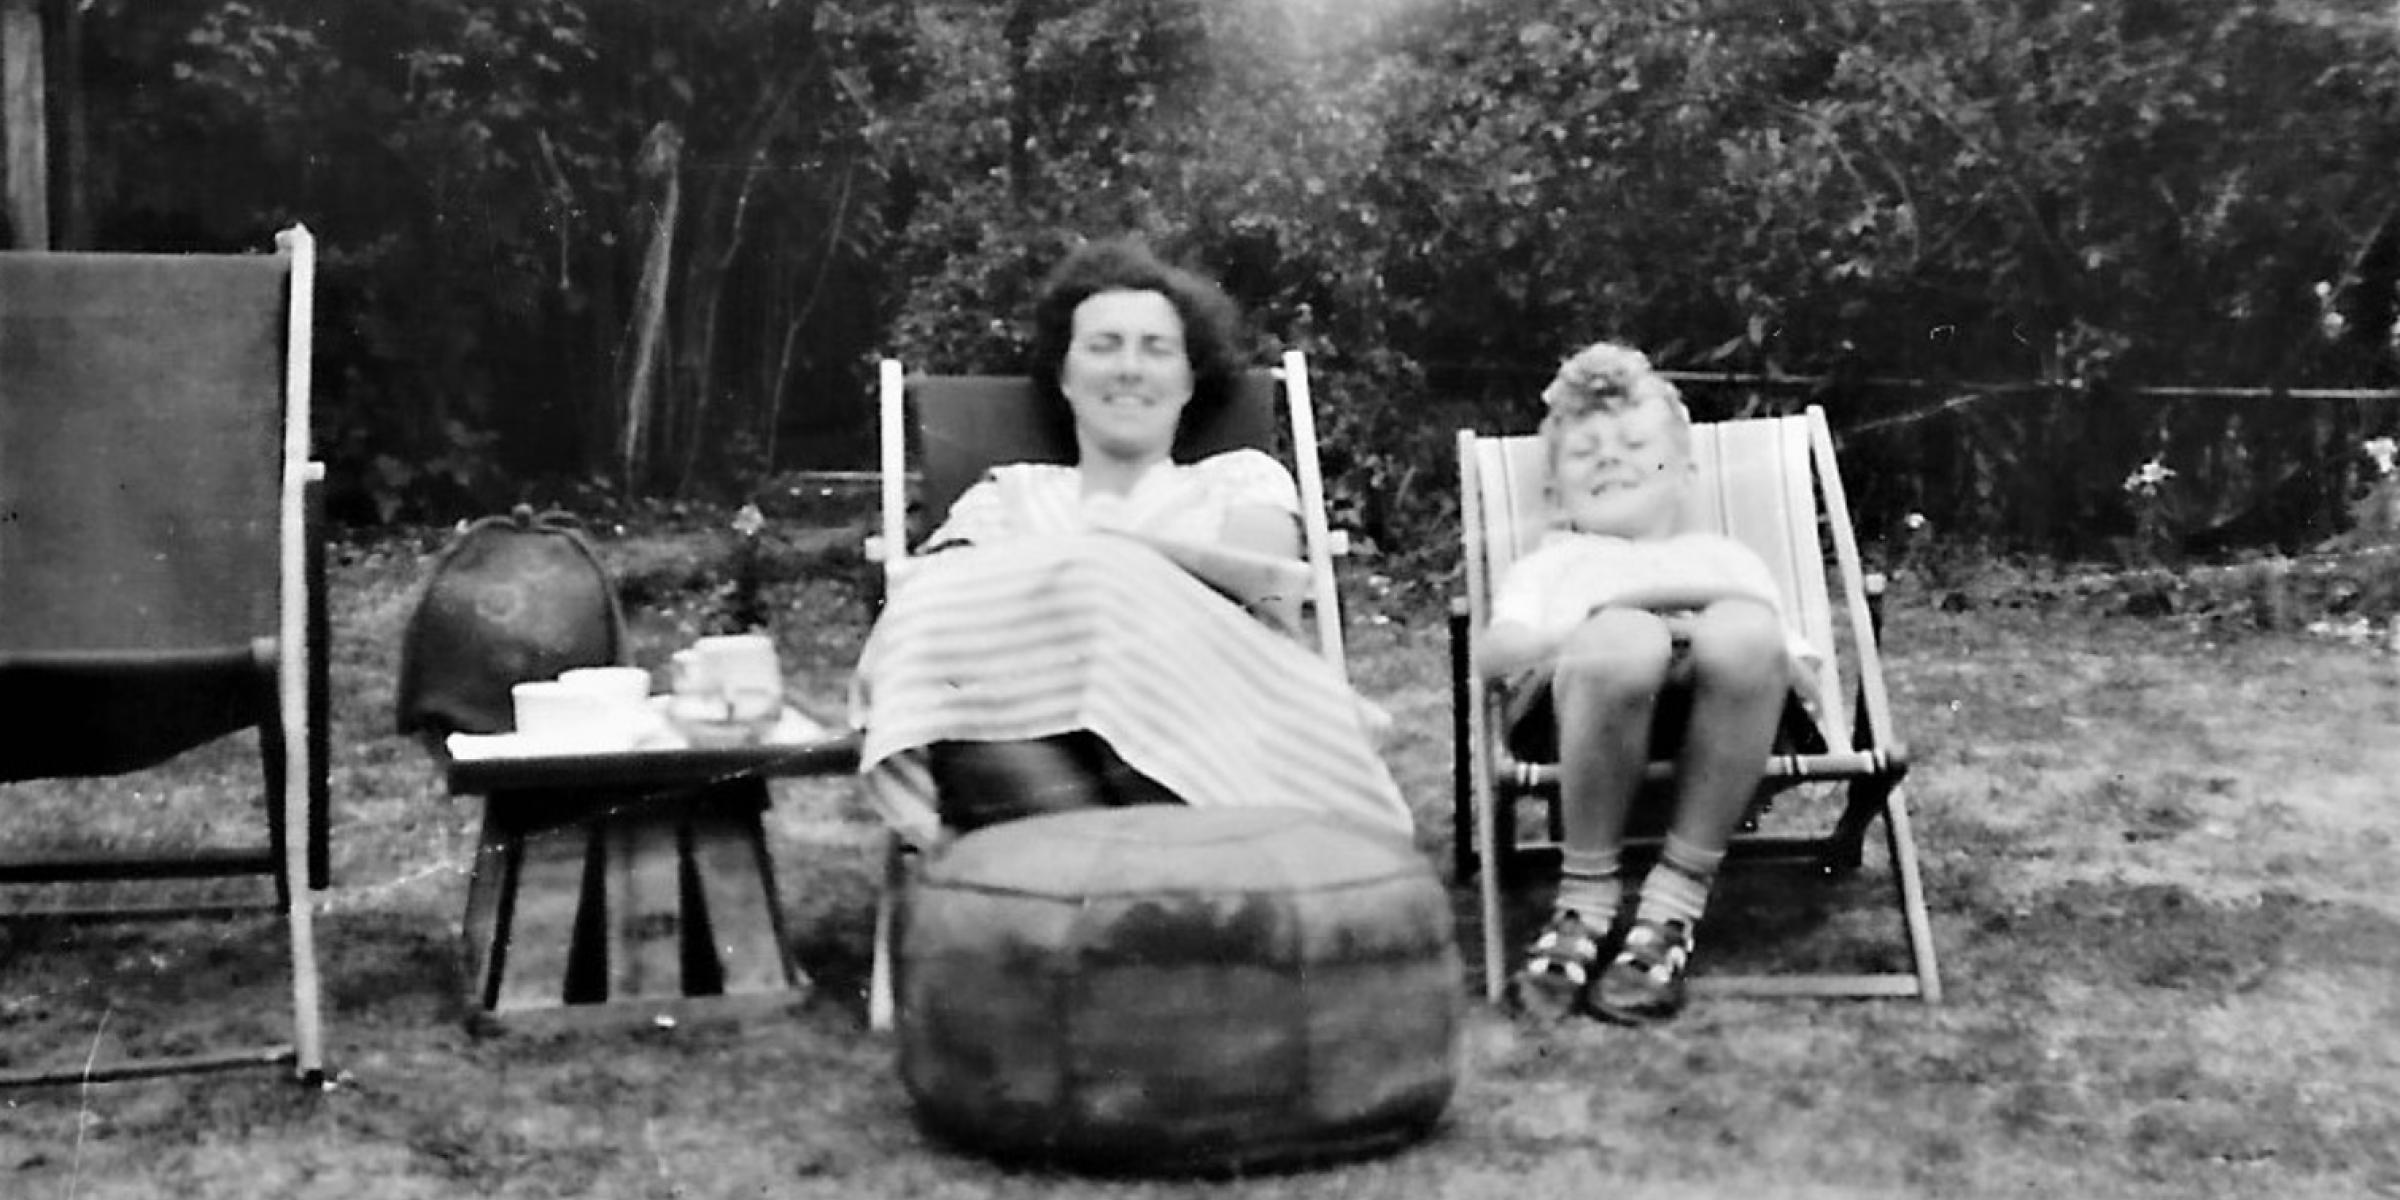 Tony Ward as a child with his mother in deckchairs